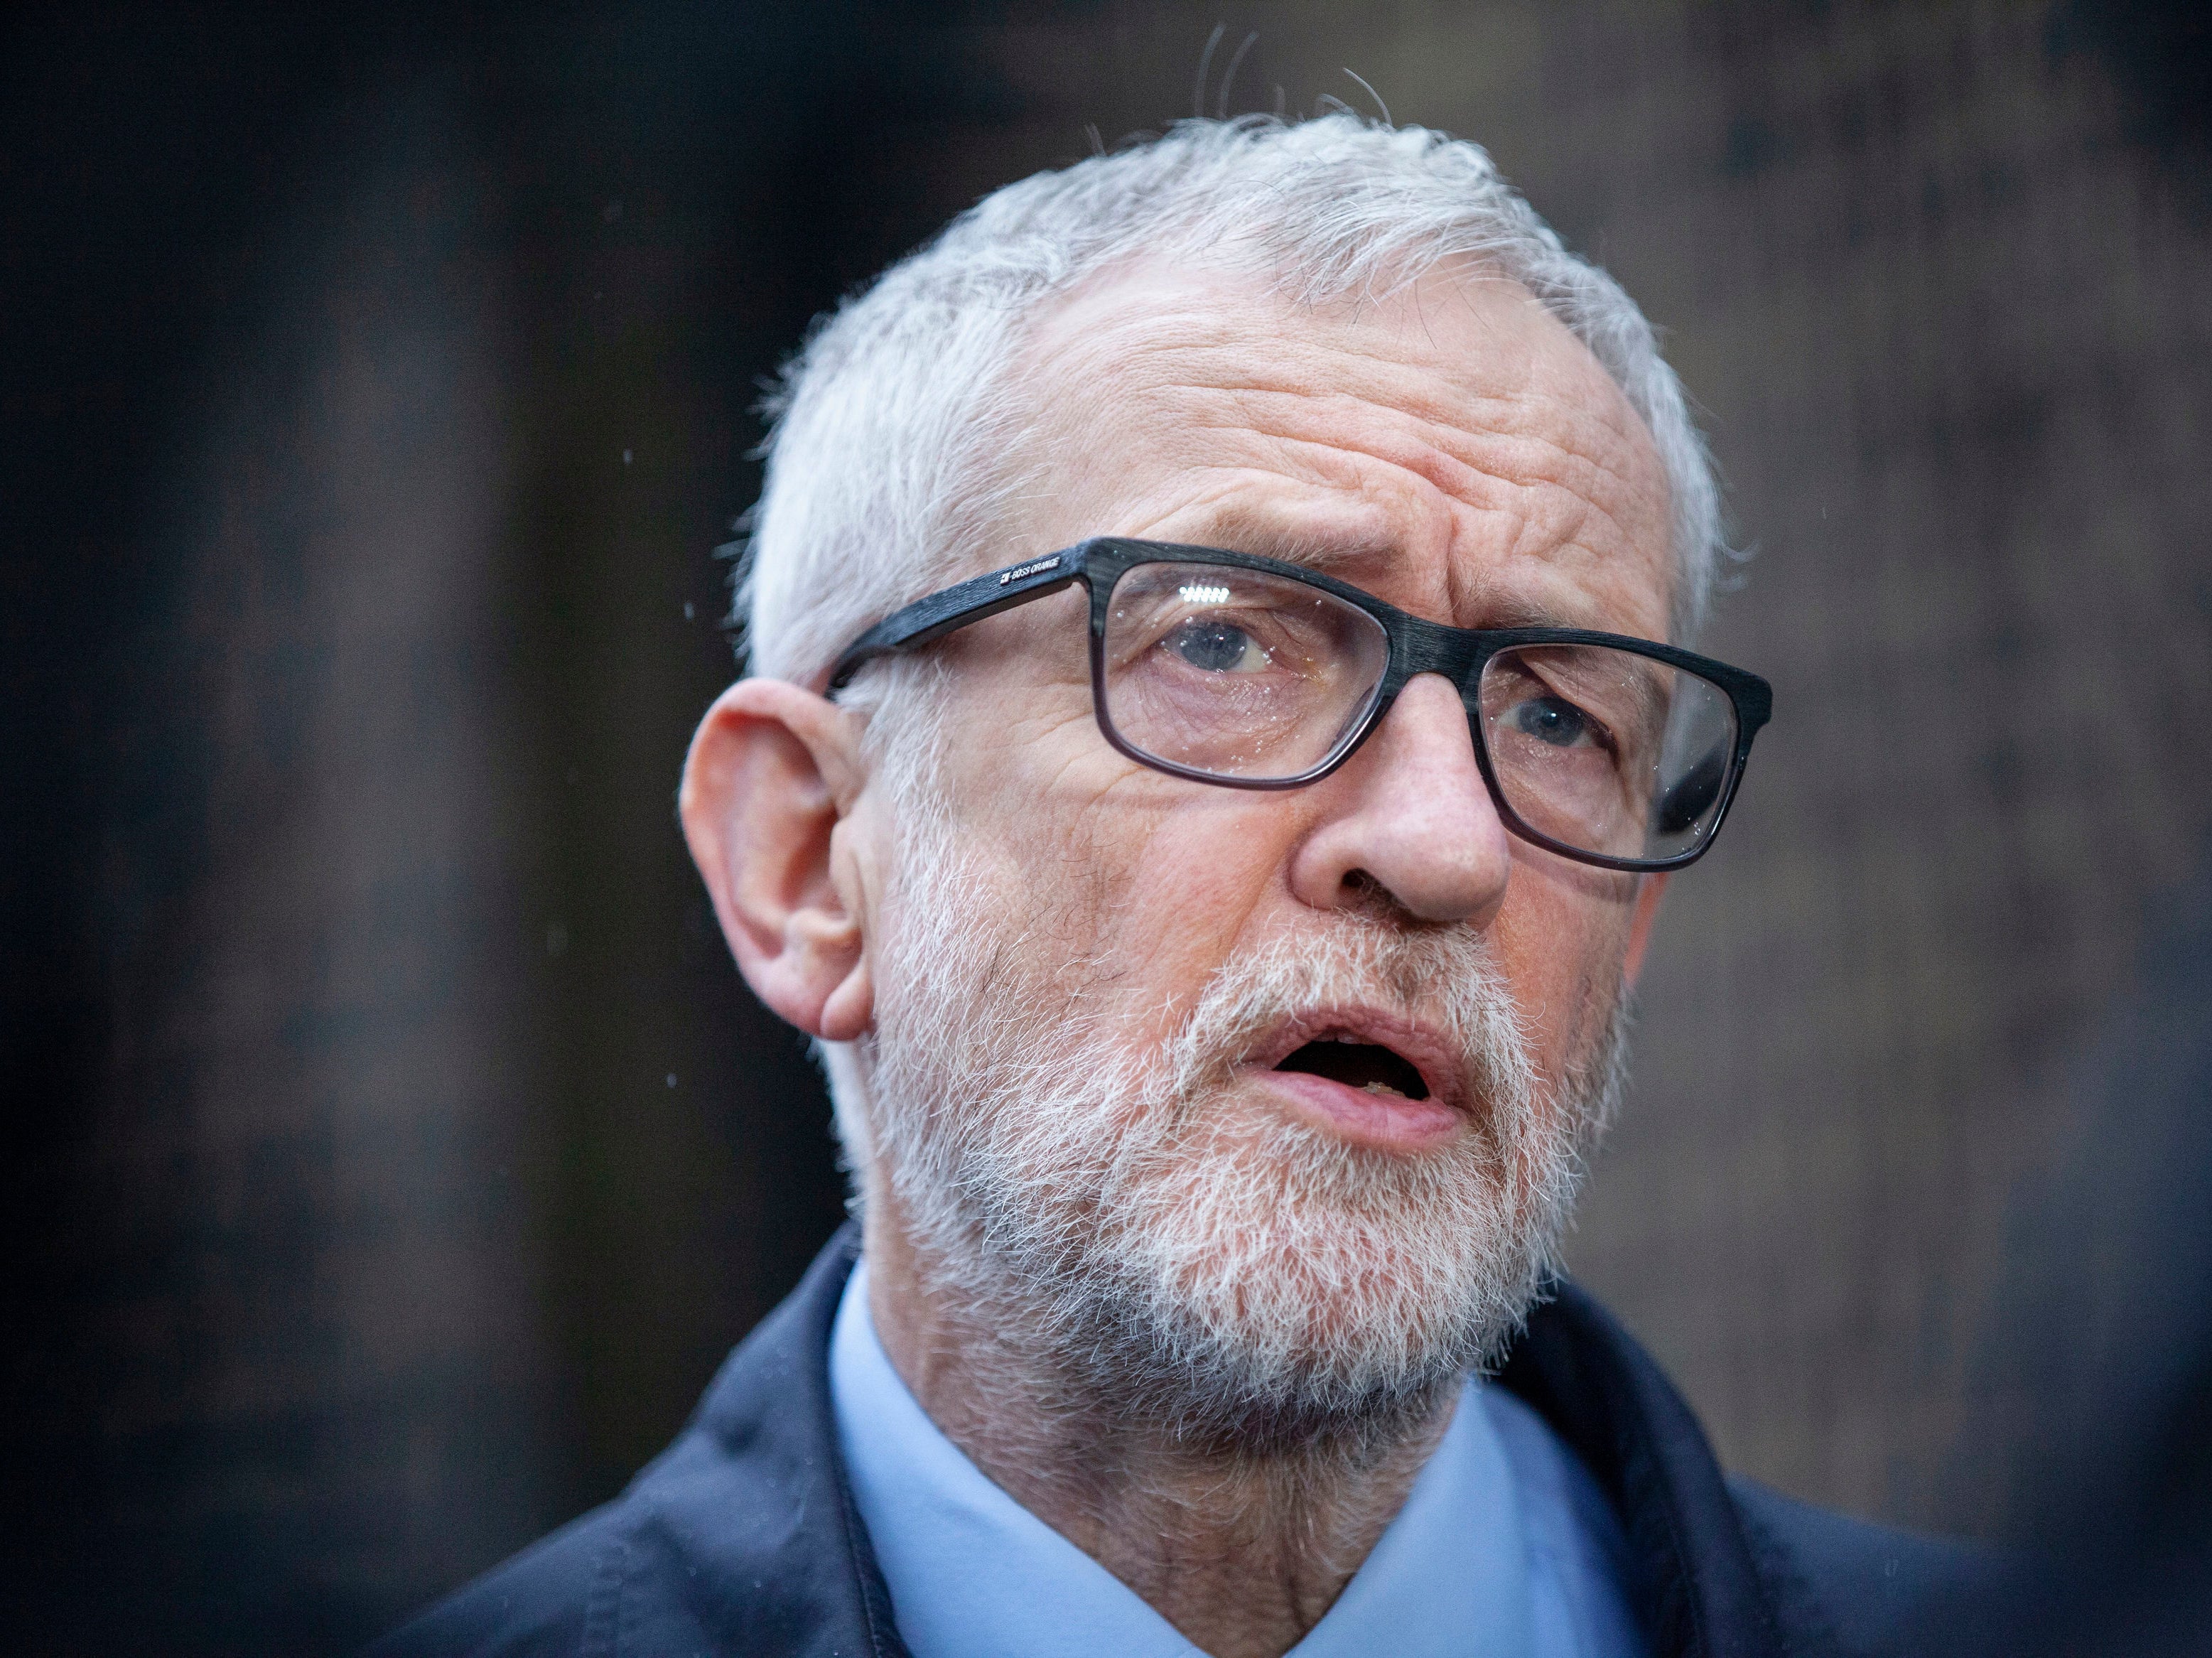 The Labour Party has been found to have broken the law by failing to prevent antisemitism during Jeremy Corbyn’s leadership